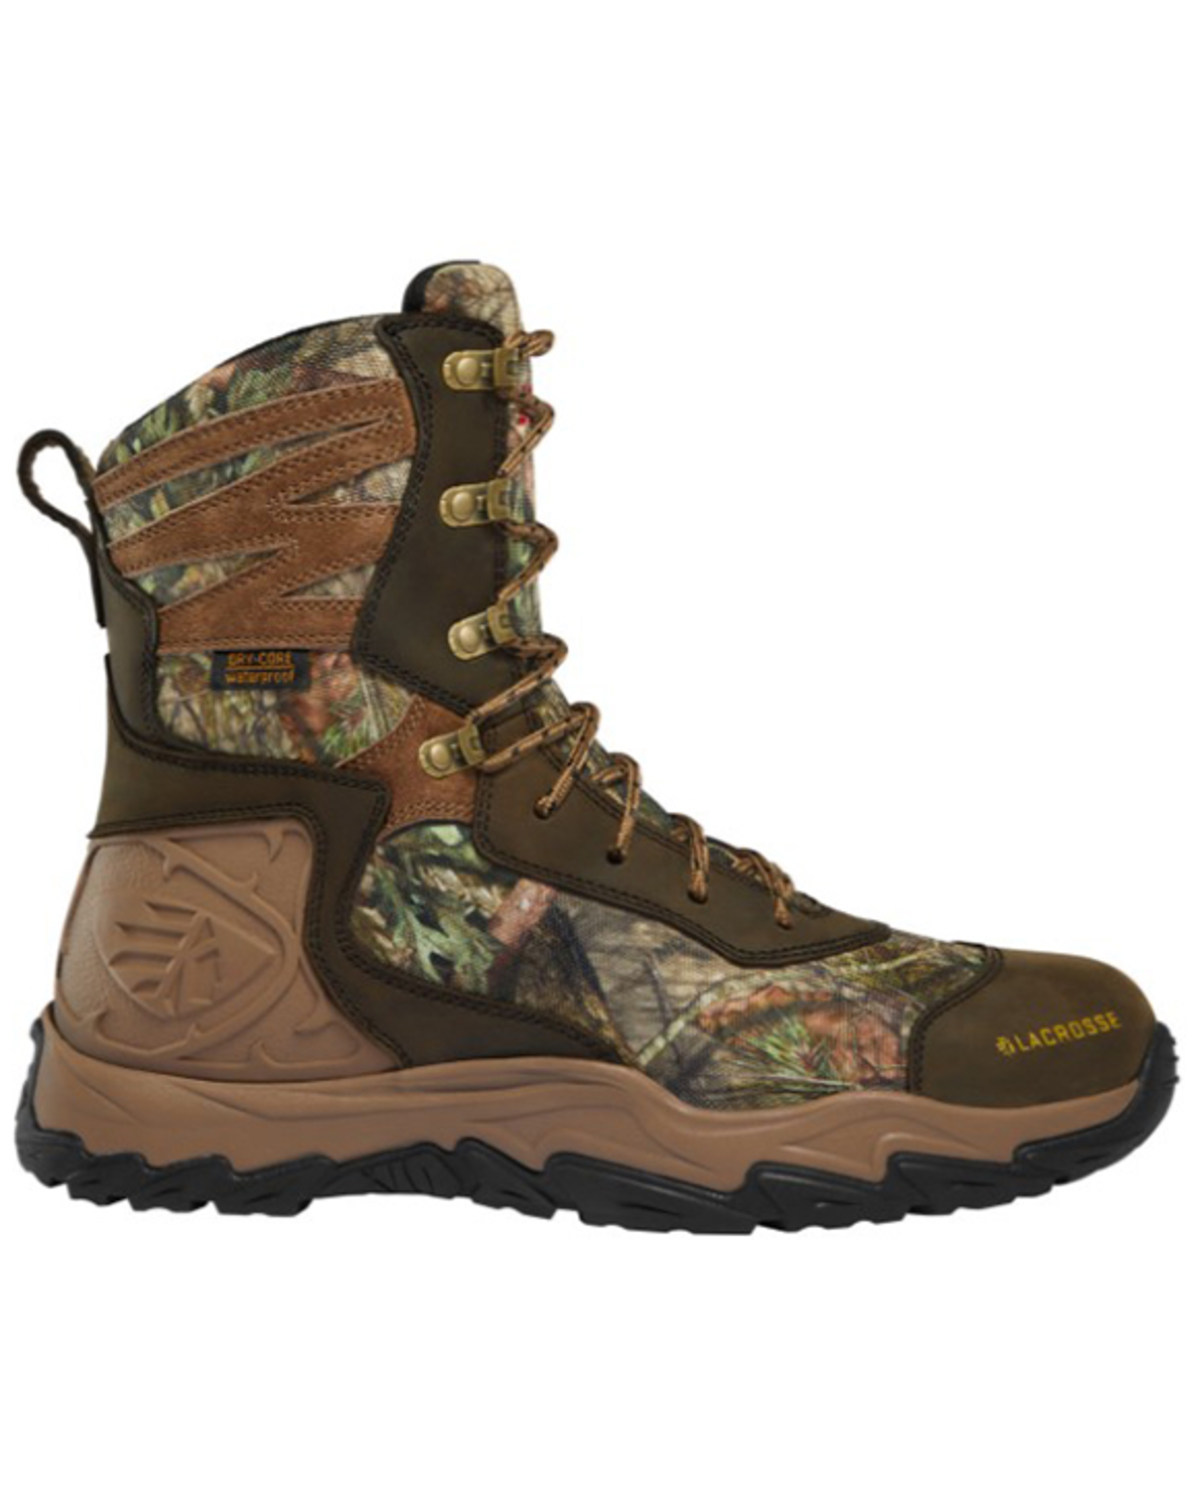 LaCrosse Men's 8" Windrose RealTree Edge 1000G Lace-Up Boots - Round Toe